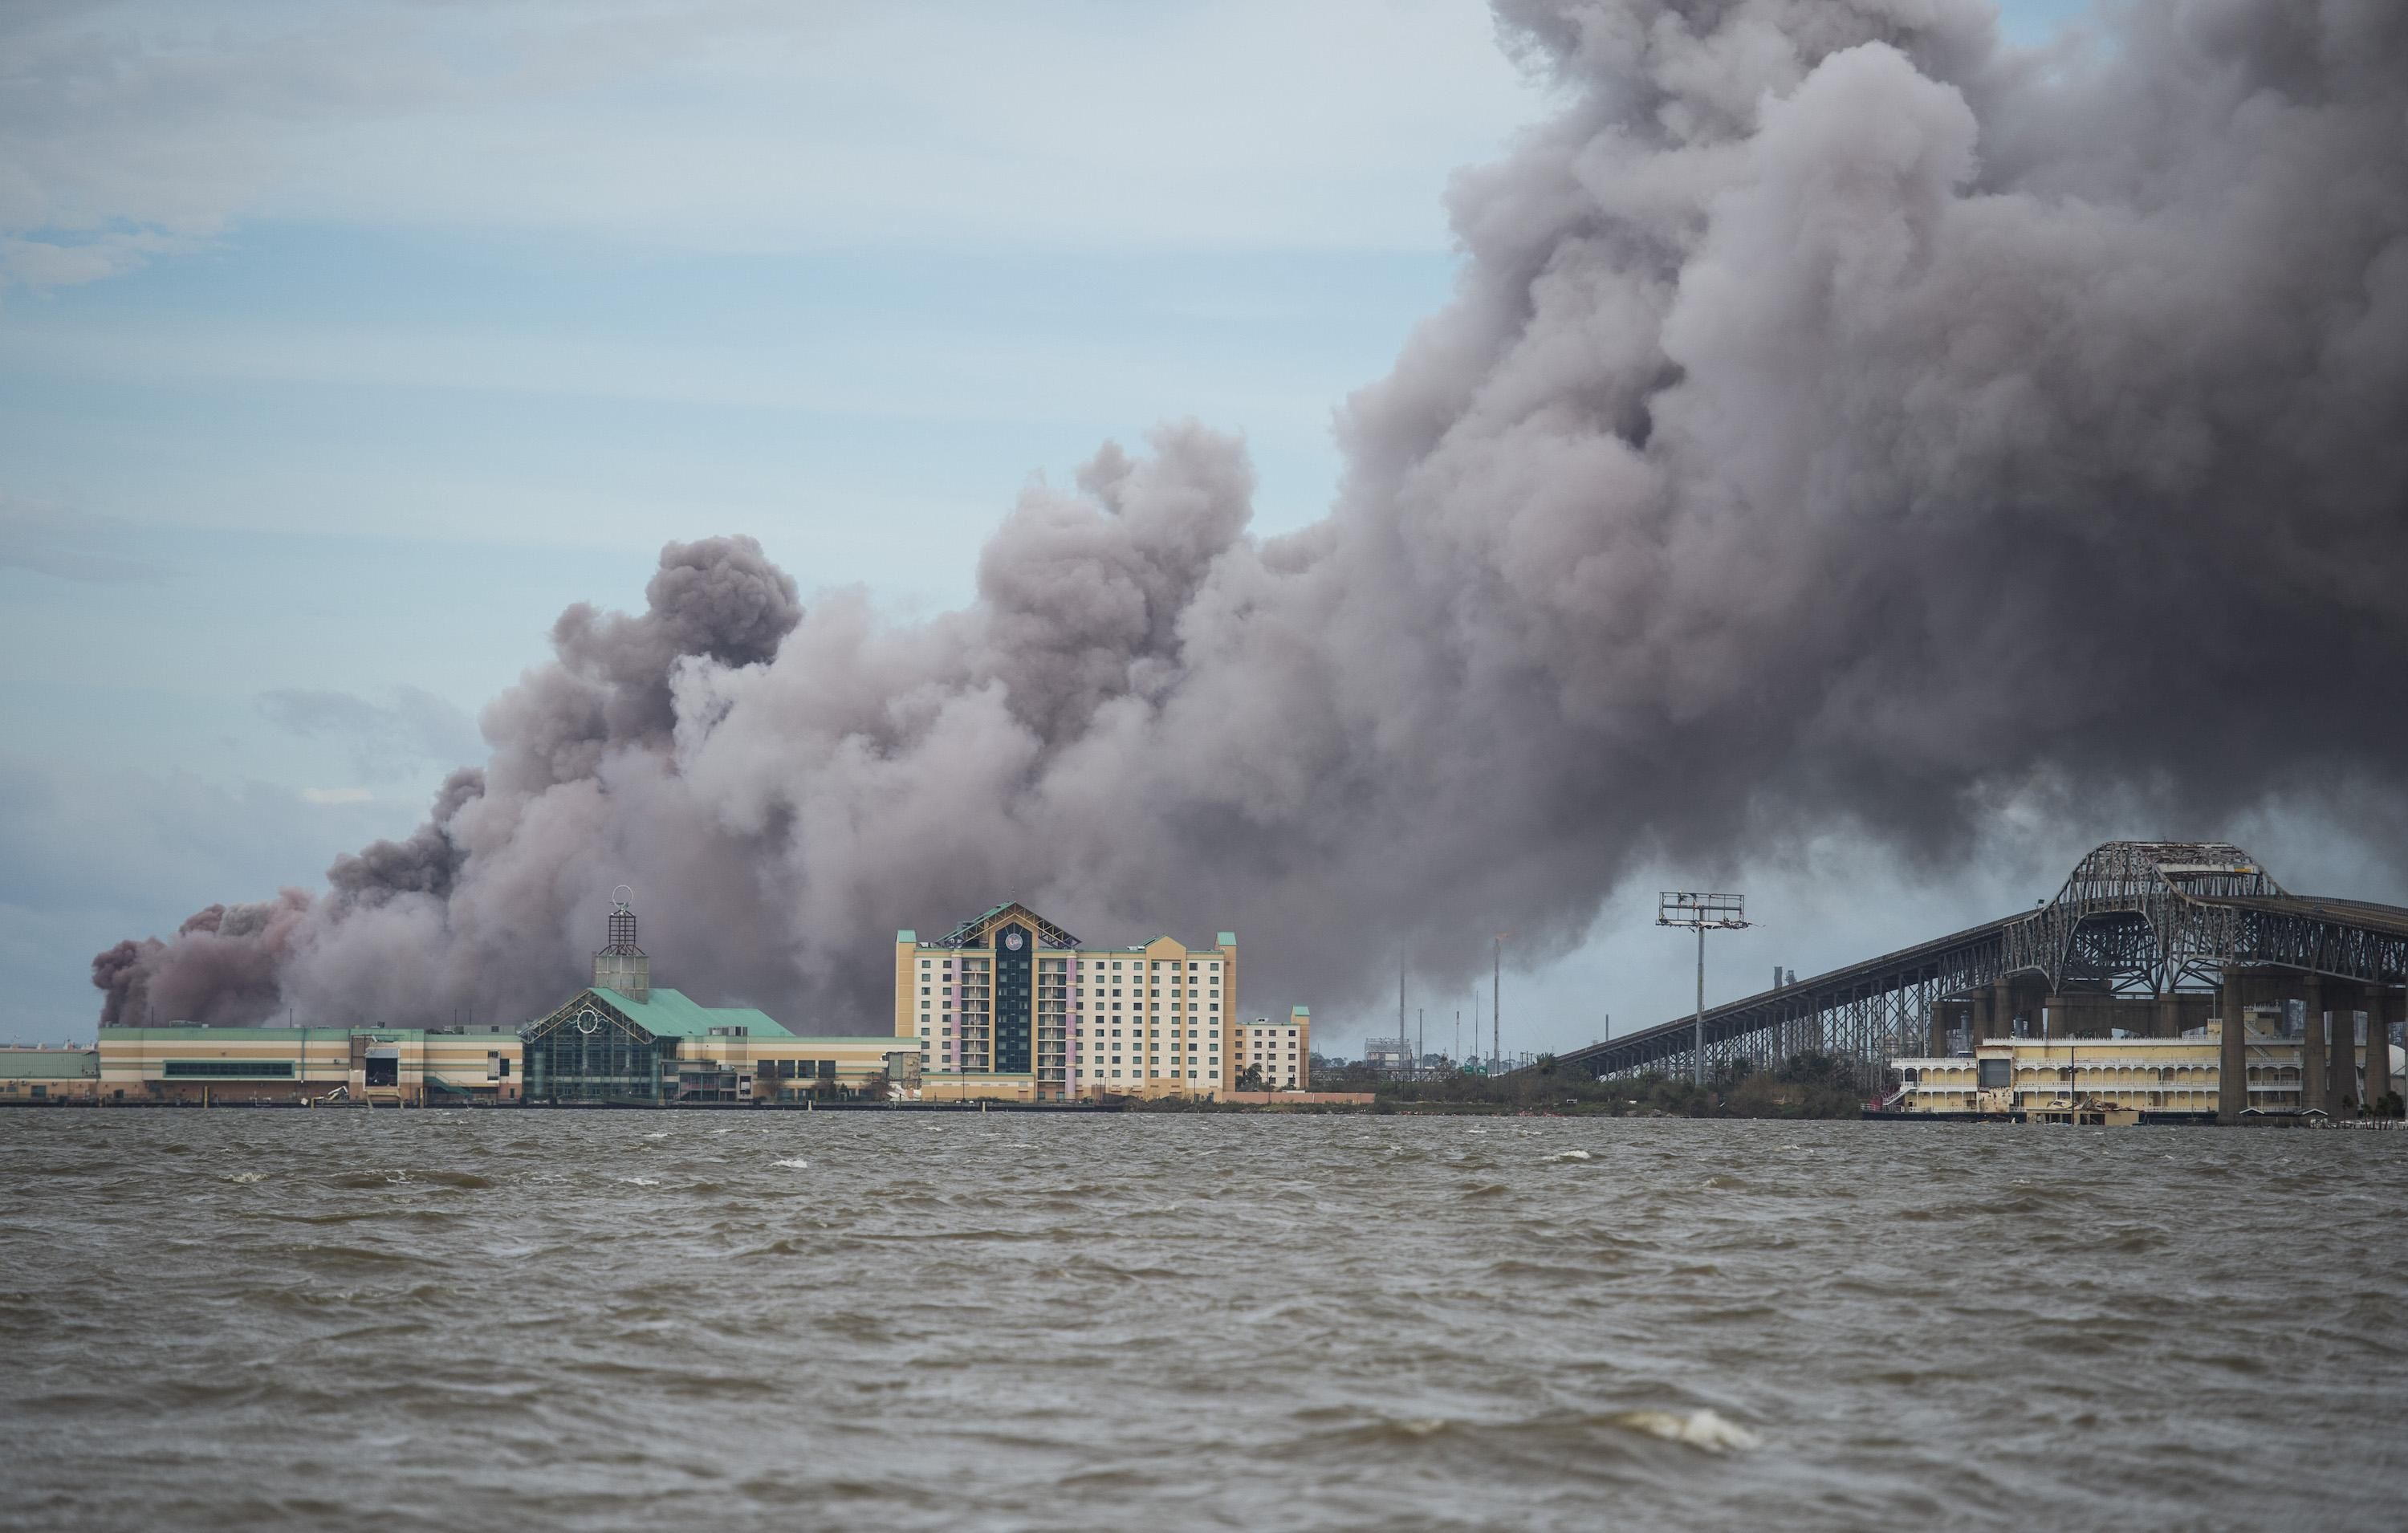 Smoke rises from a burning chemical plant after the passing of Hurricane Laura in Lake Charles, Louisiana on August 27, 2020.